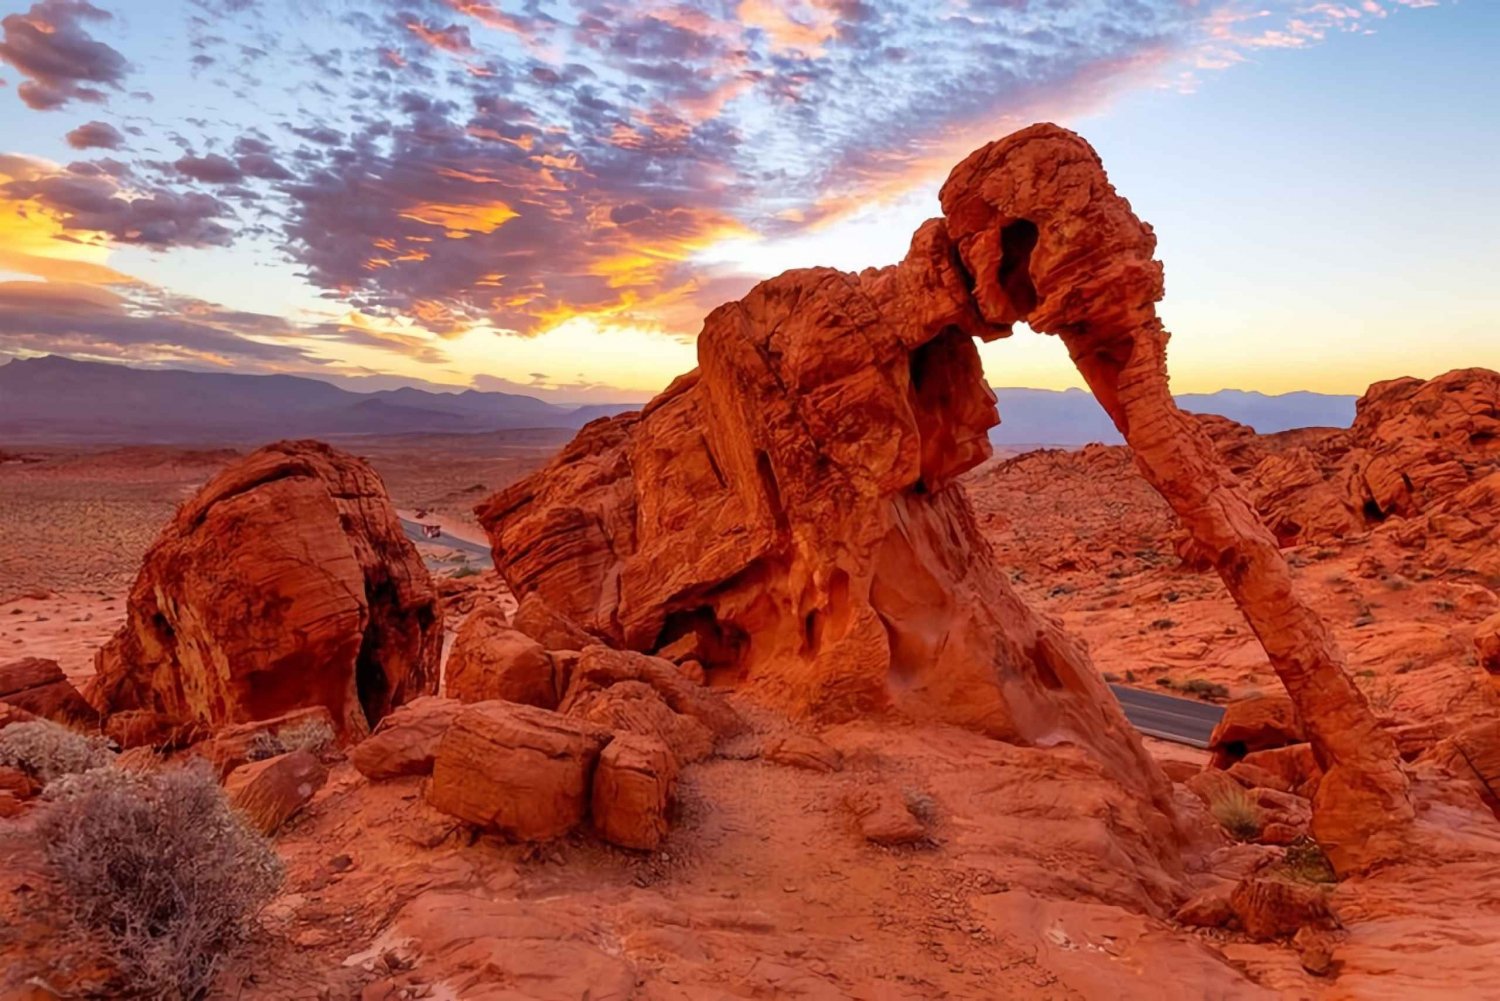 Combo Tour: Valley of Fire & Red Rock Canyon Full-Day Tour